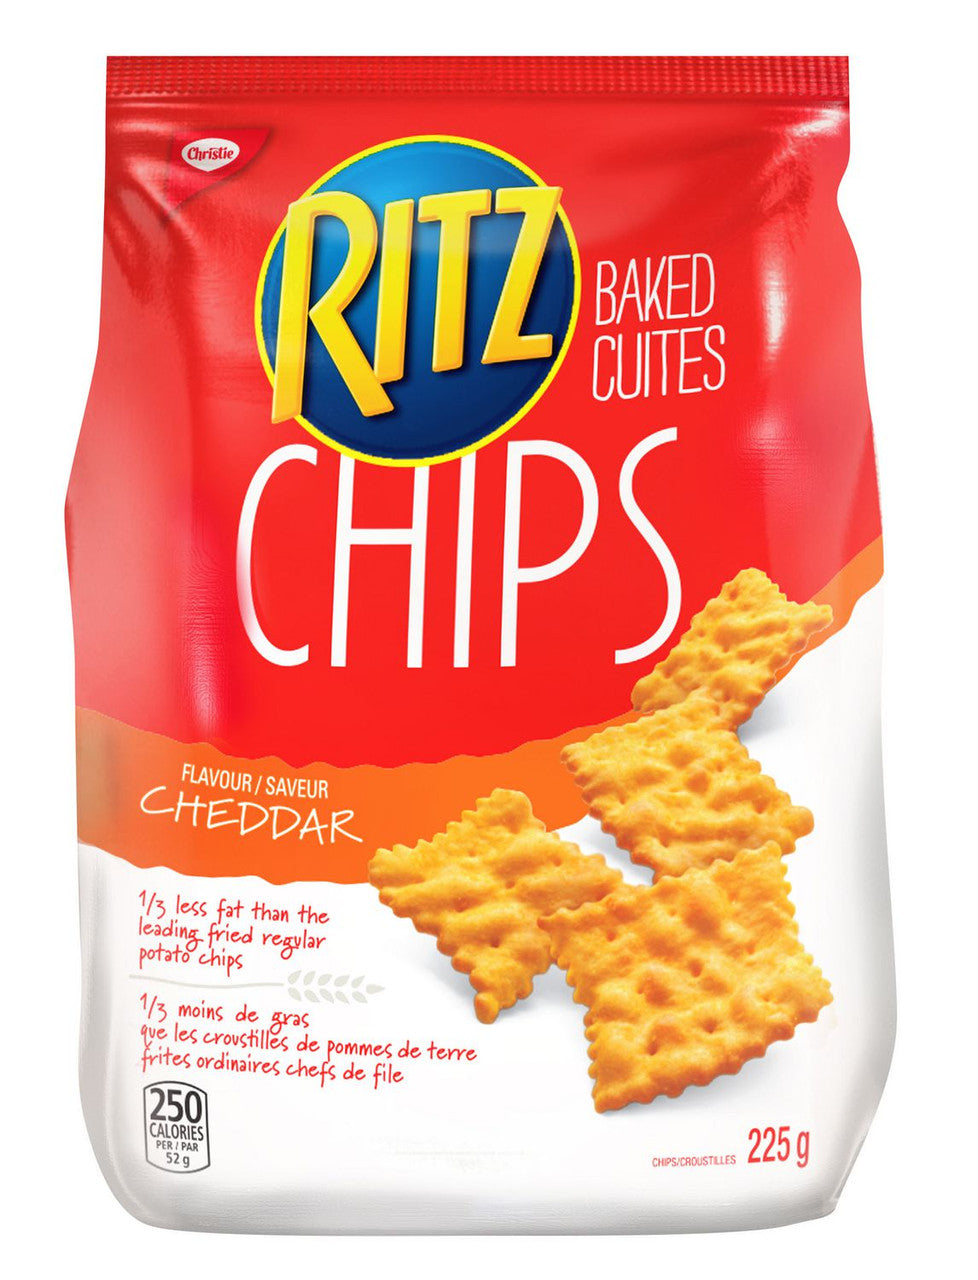 Ritz Baked Chips Cheddar Flavour, 225g/7.9oz, (Imported from Canada)